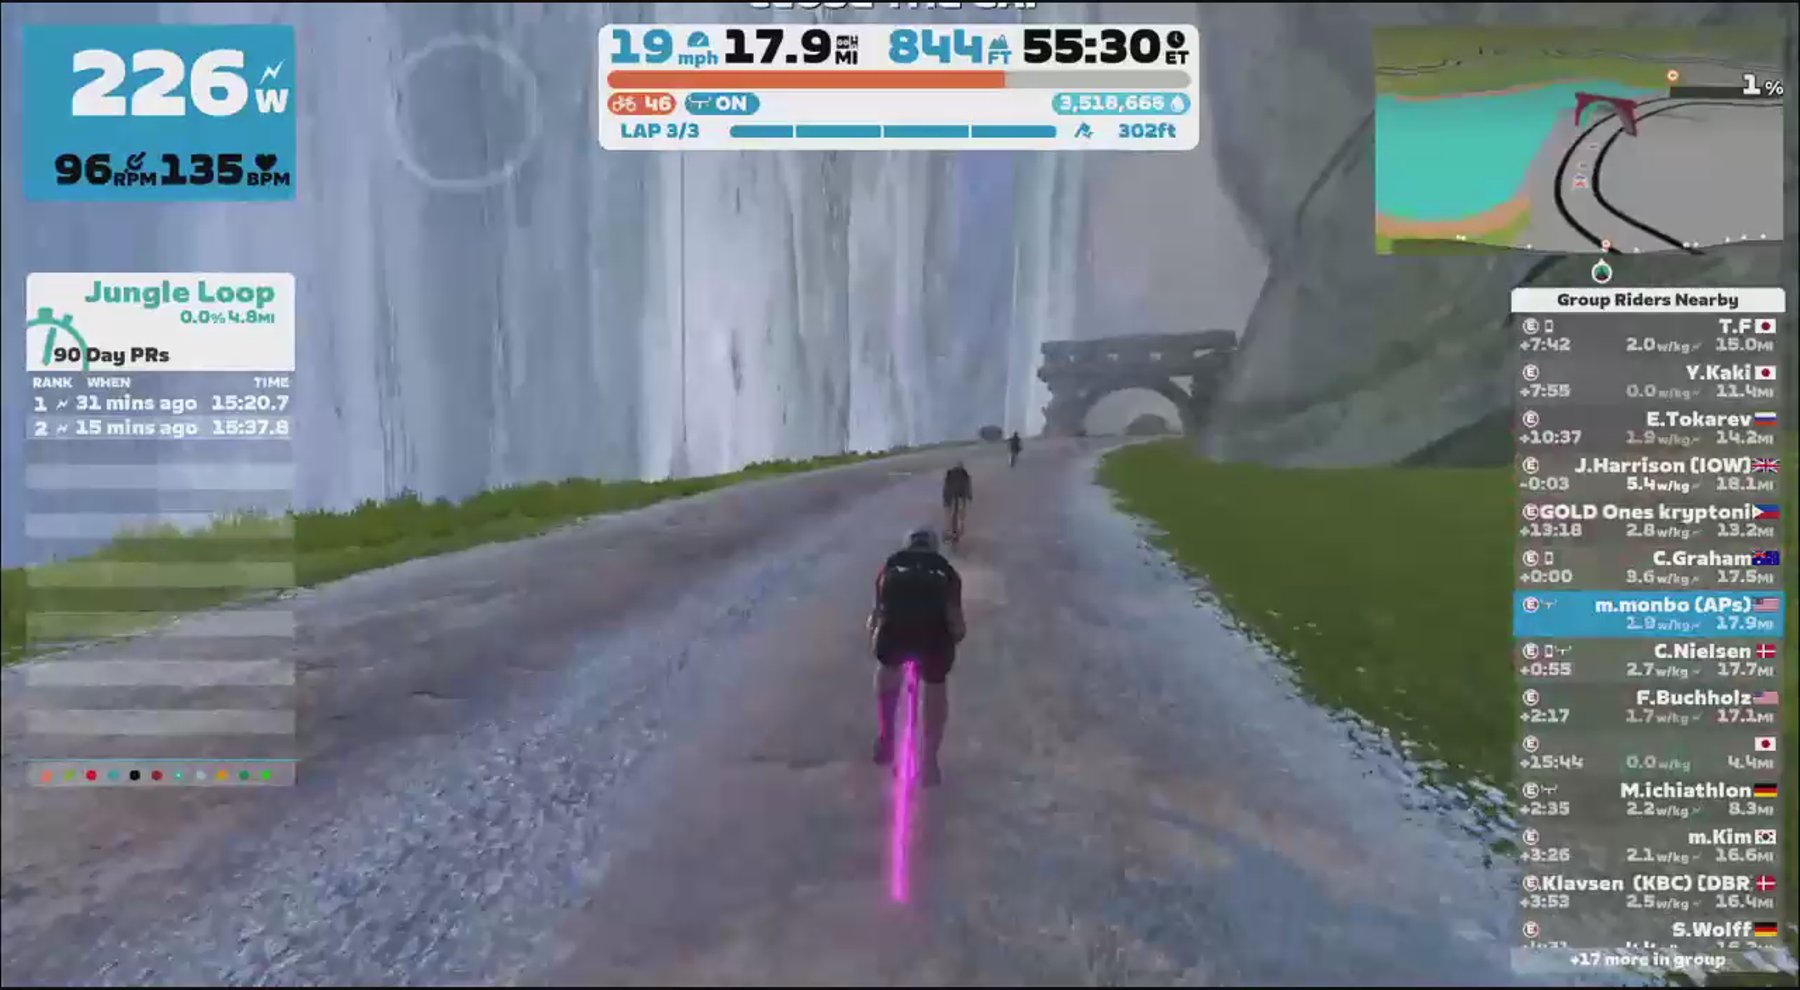 Zwift - Group Ride: Vitality for UNICEF Group Ride (E) on Jungle Circuit in Watopia